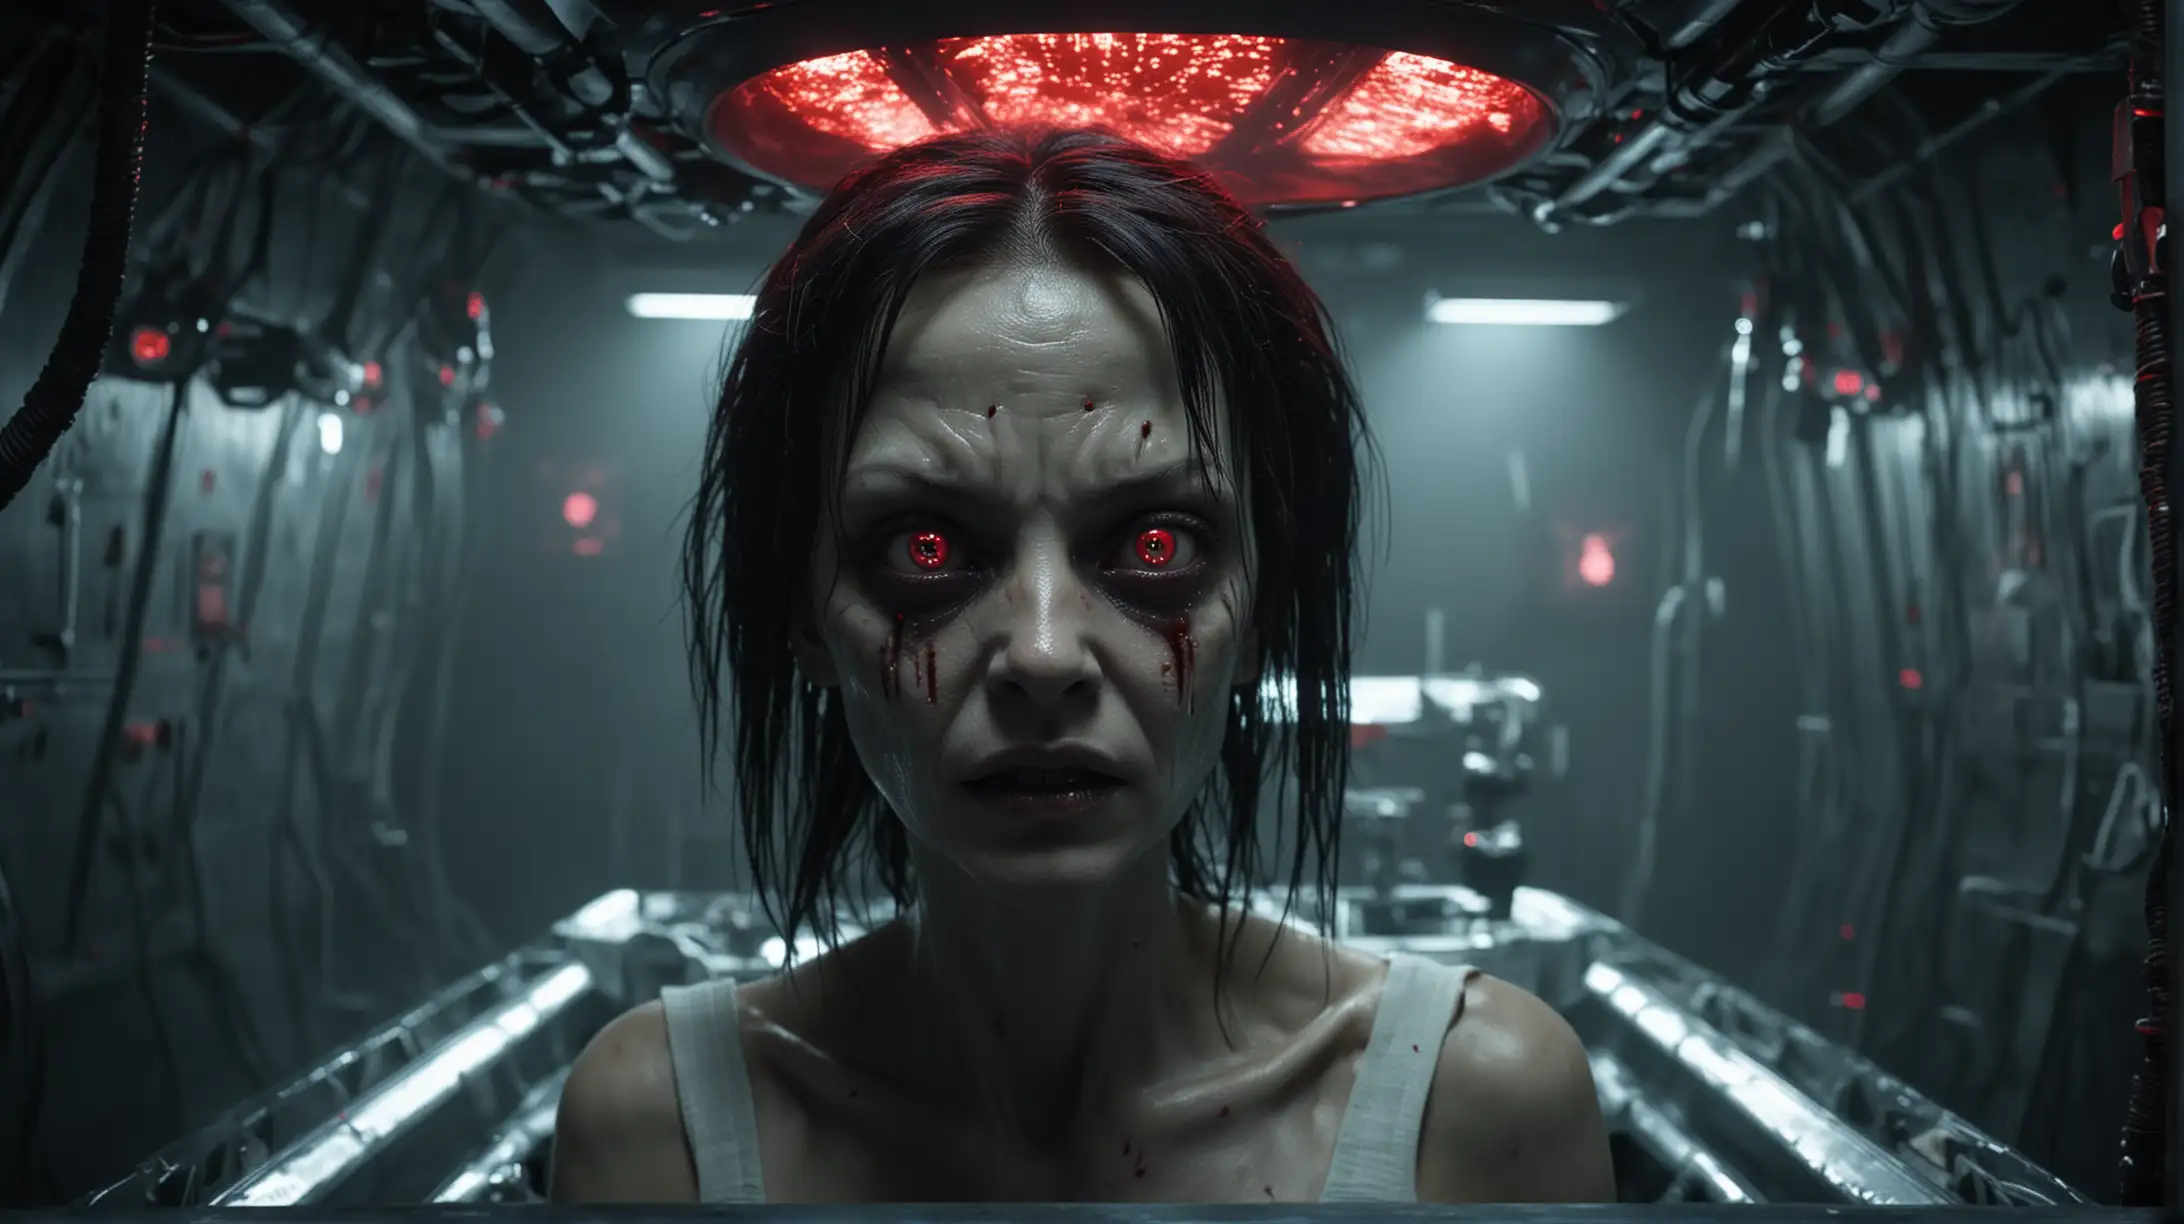 A evil and sinister looking alien with red eyes in a scary dark spaceship room operating on terrified female human abductee on a operating table